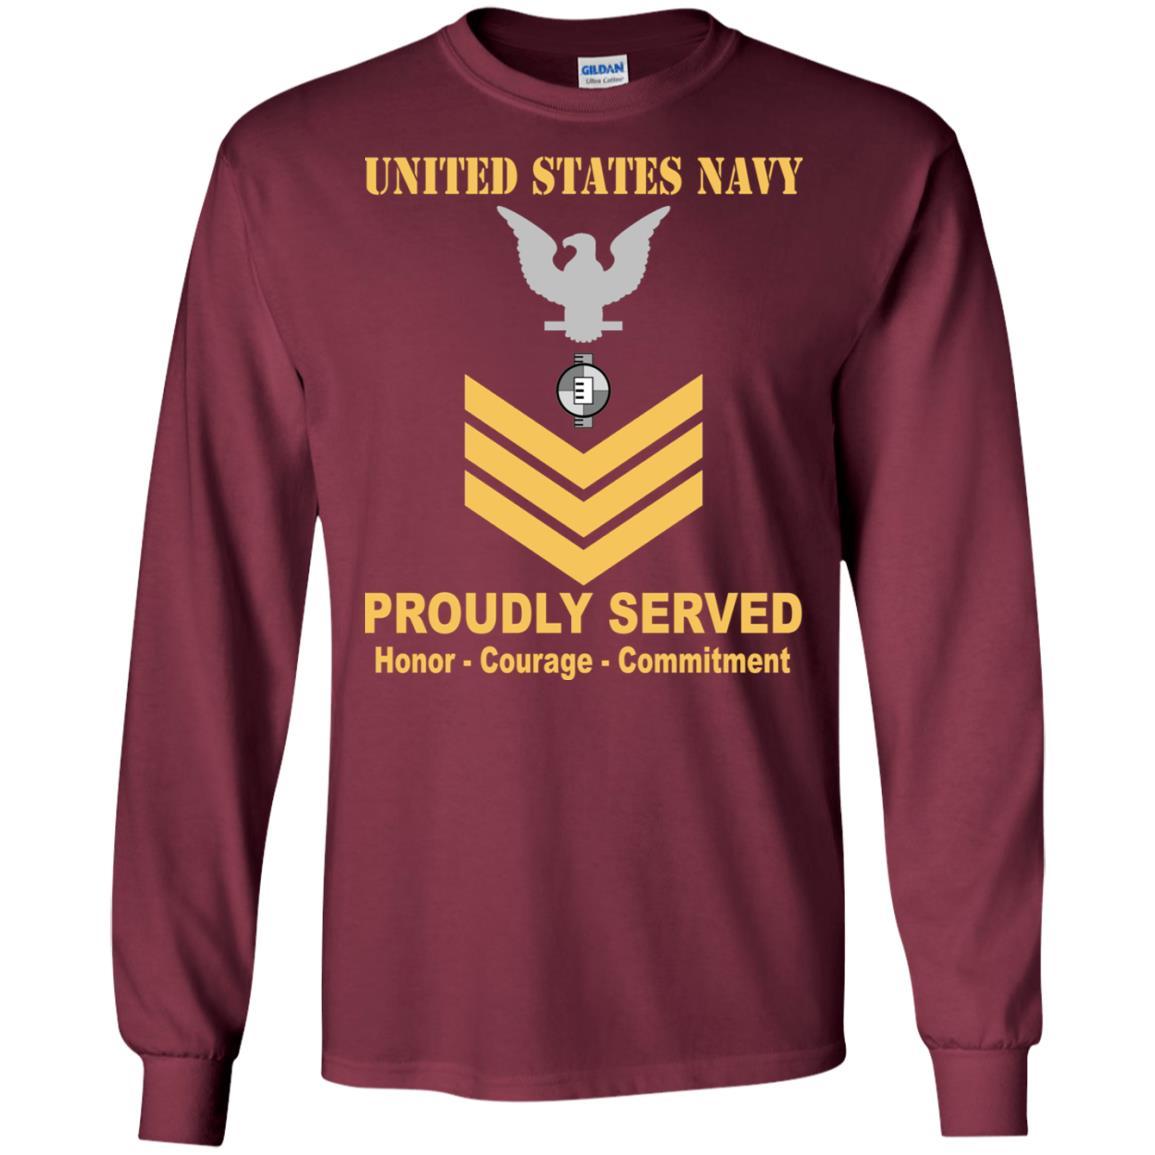 Navy Engineering Aide Navy EA E-6 Rating Badges Proudly Served T-Shirt For Men On Front-TShirt-Navy-Veterans Nation